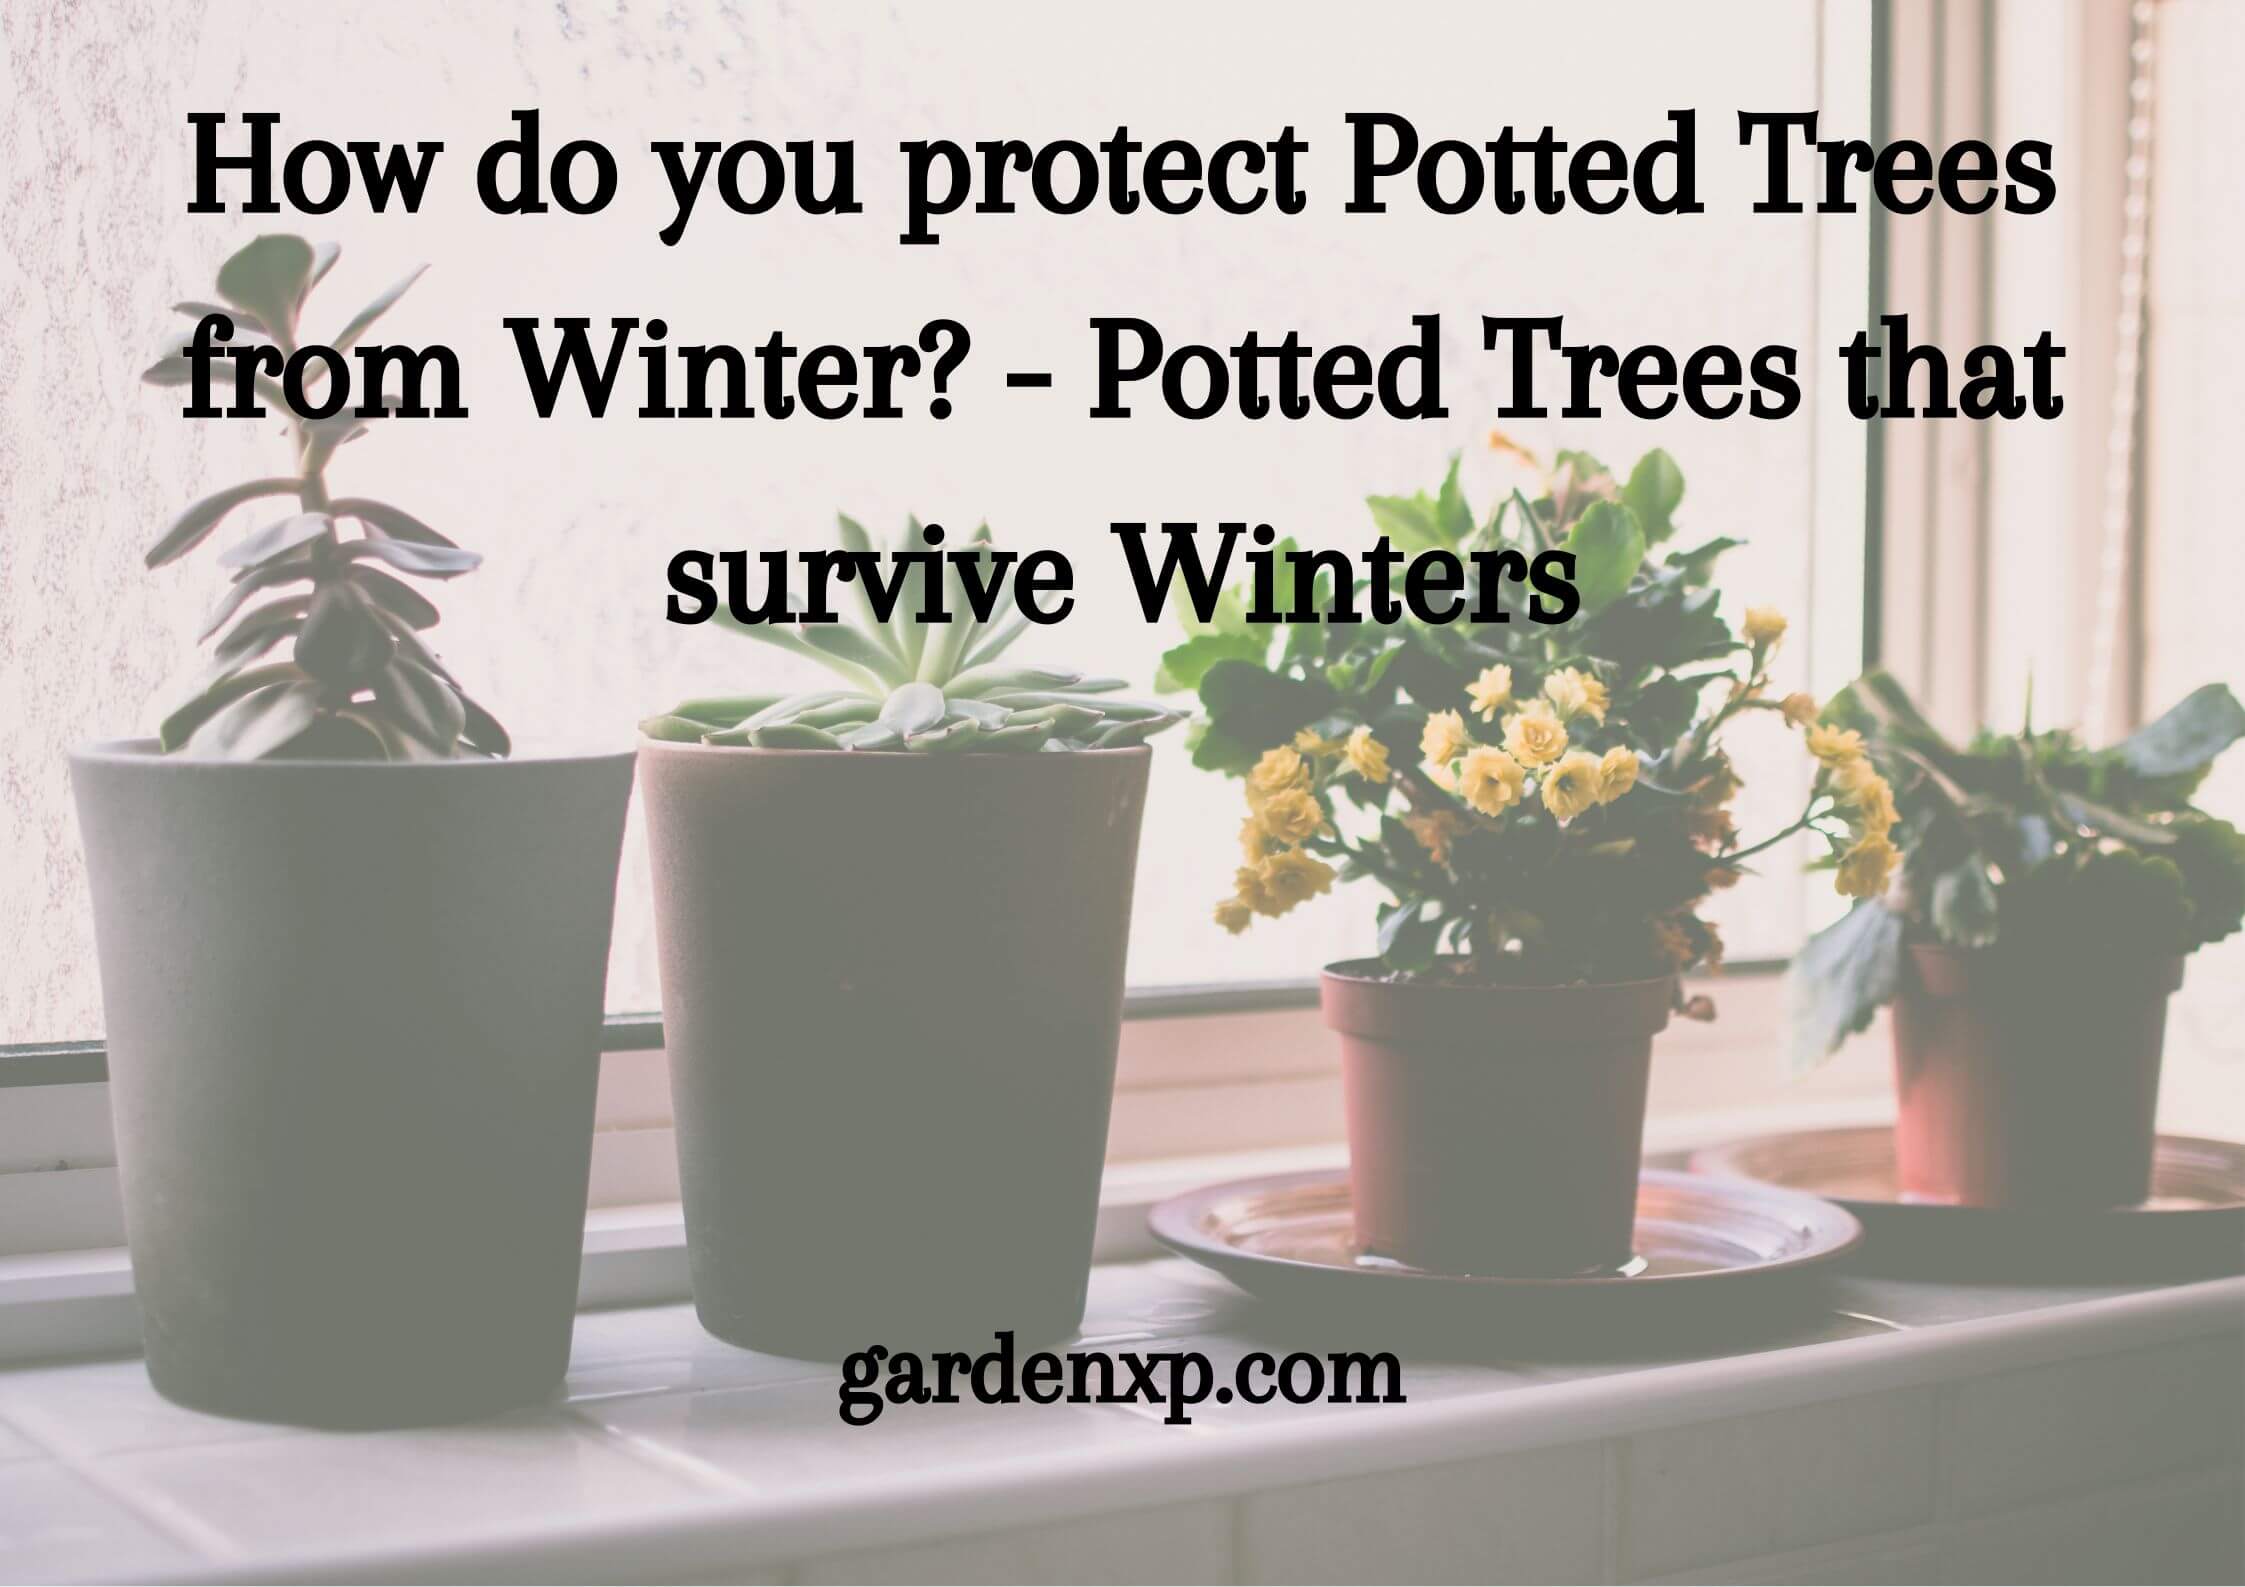 How do you protect Potted Trees from Winter? - Potted Trees that survive Winters